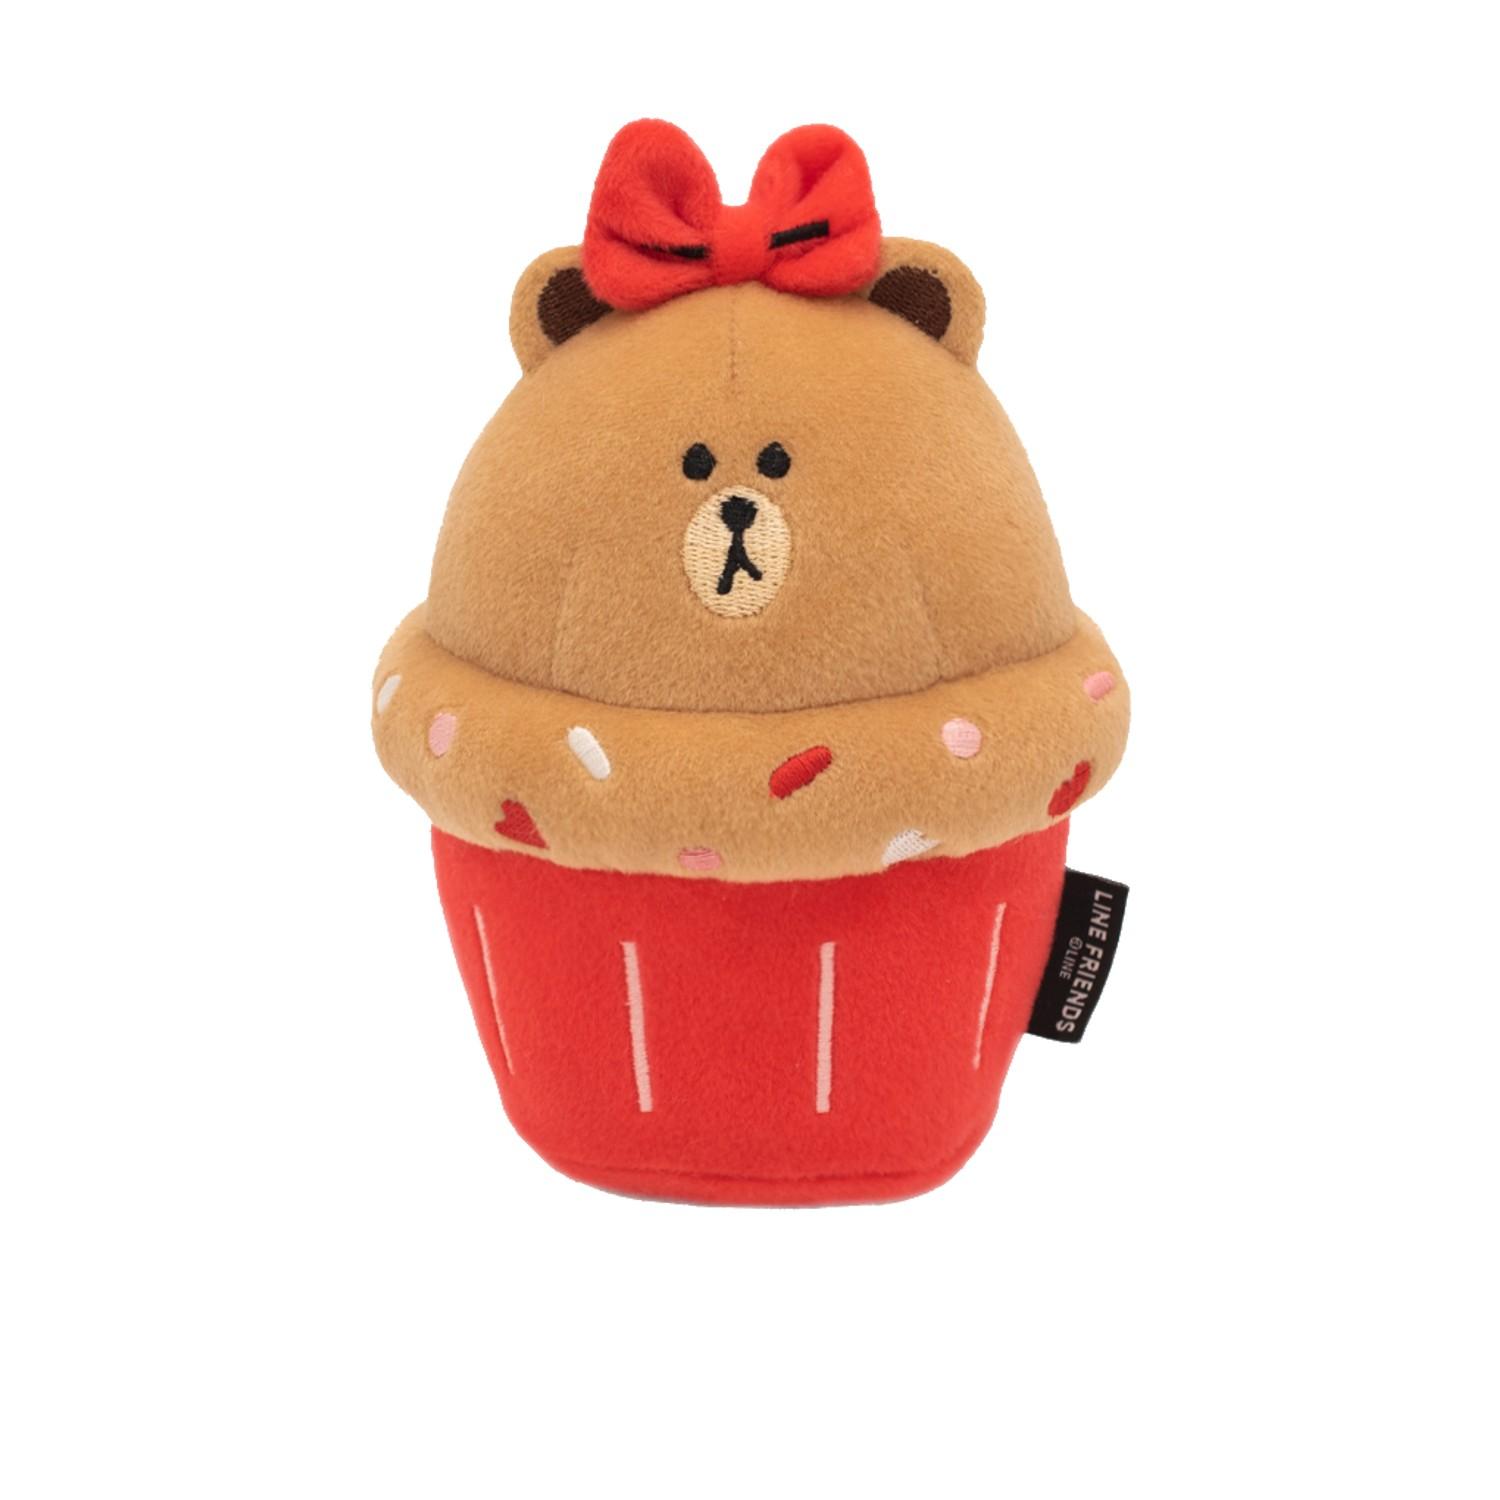 https://images.baxterboo.com/global/images/products/large/zippypaws-line-friends-nomnomz-cupcake-dog-toy-brown-bear-9410.jpg